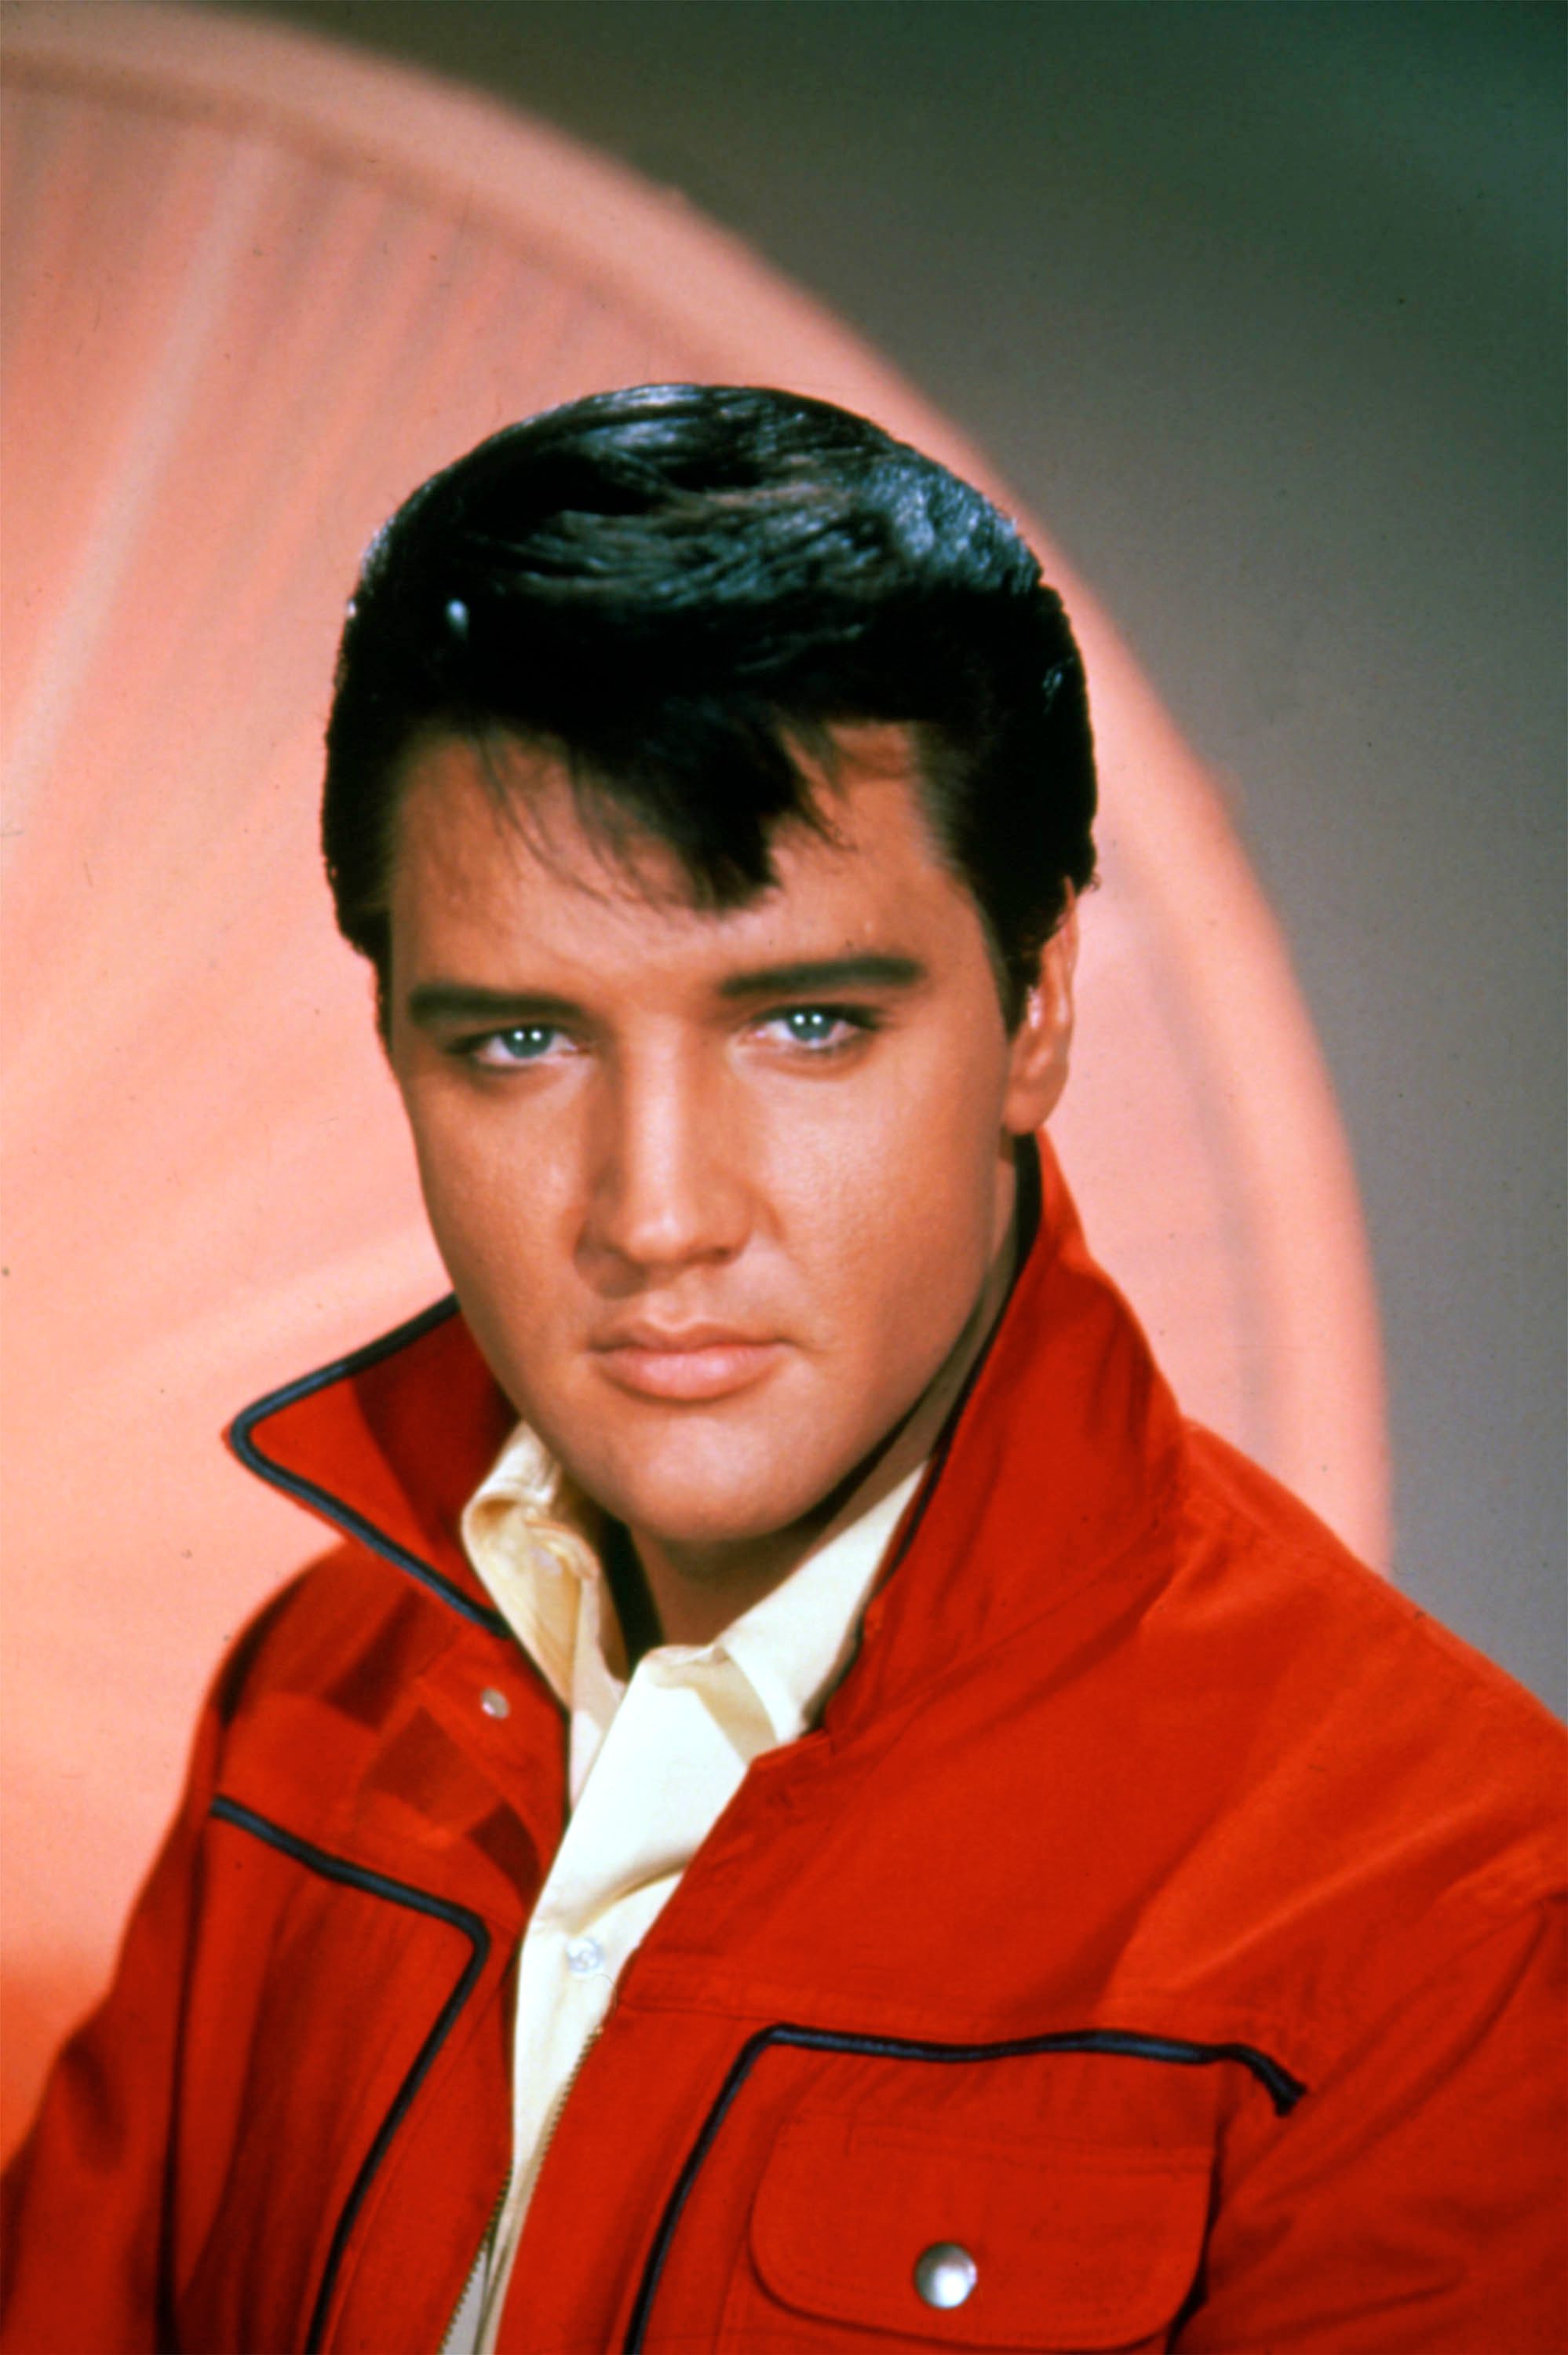 Late singer Elvis Presley poses for a studio portrait on January 1, 1965. | Photo: Getty Images.